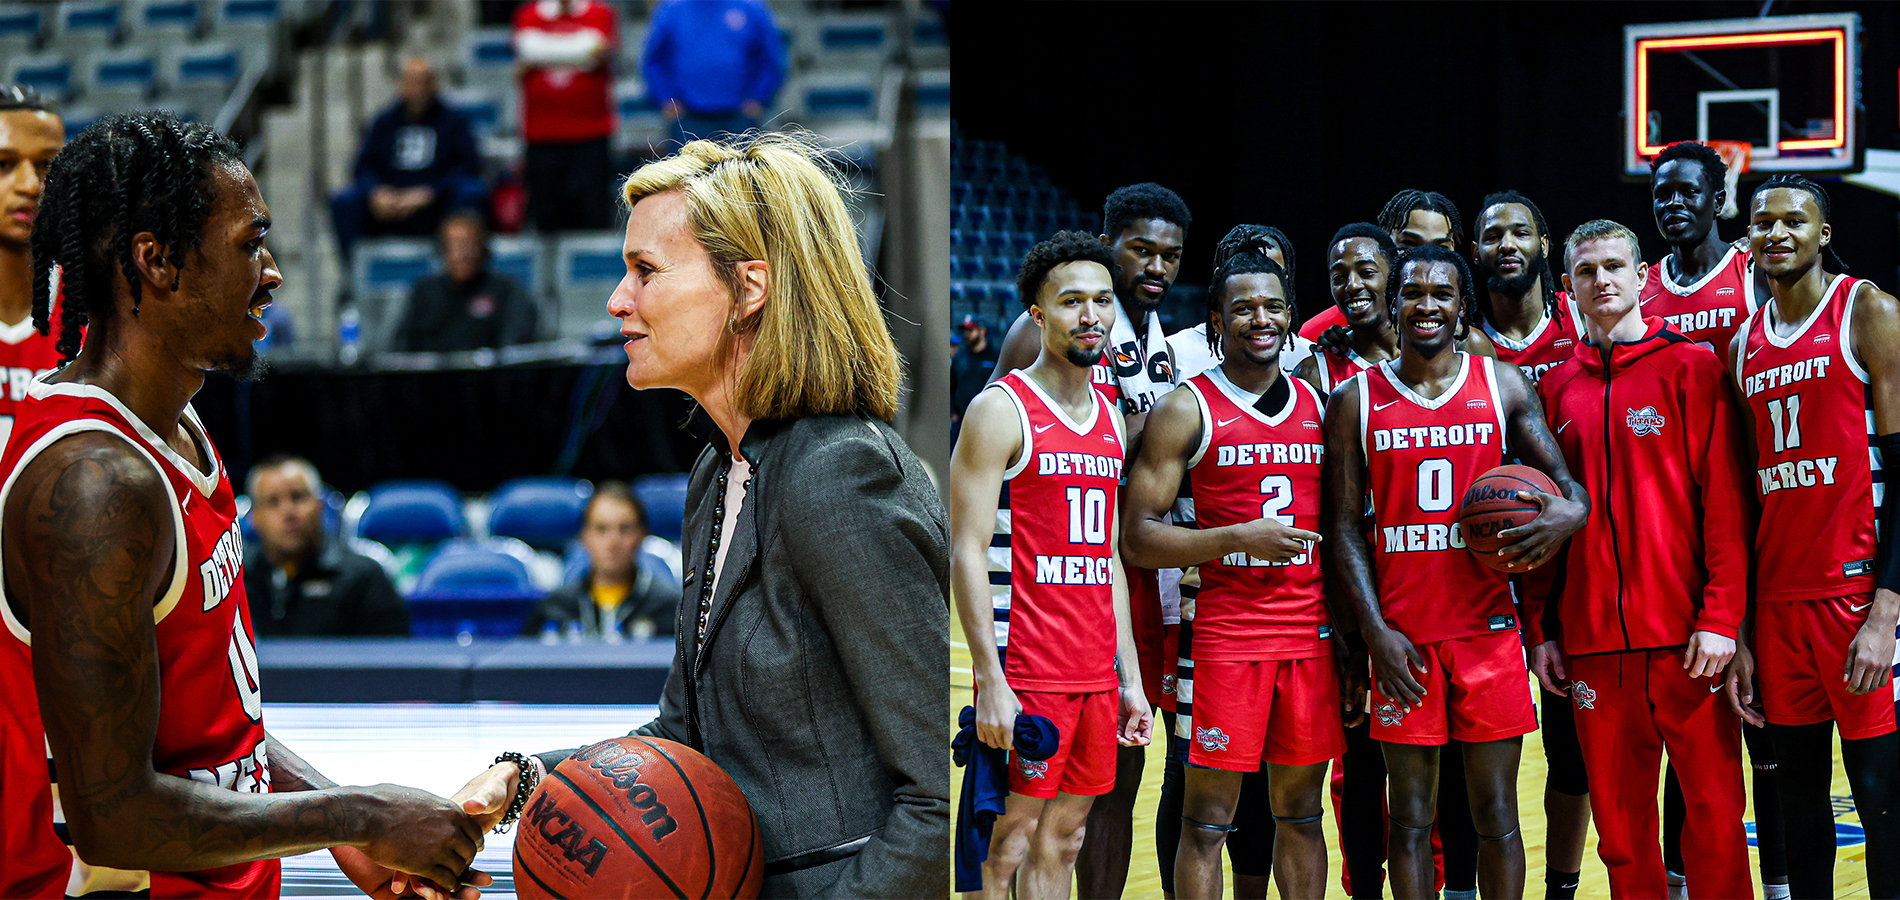 Antoine Davis, left, shakes hands with Horizon League commissioner Julie Roe Lach, who holds a basketball, at right, the twelve Titan men's basketball student-athletes wearing red Detroit Mercy jerseys.